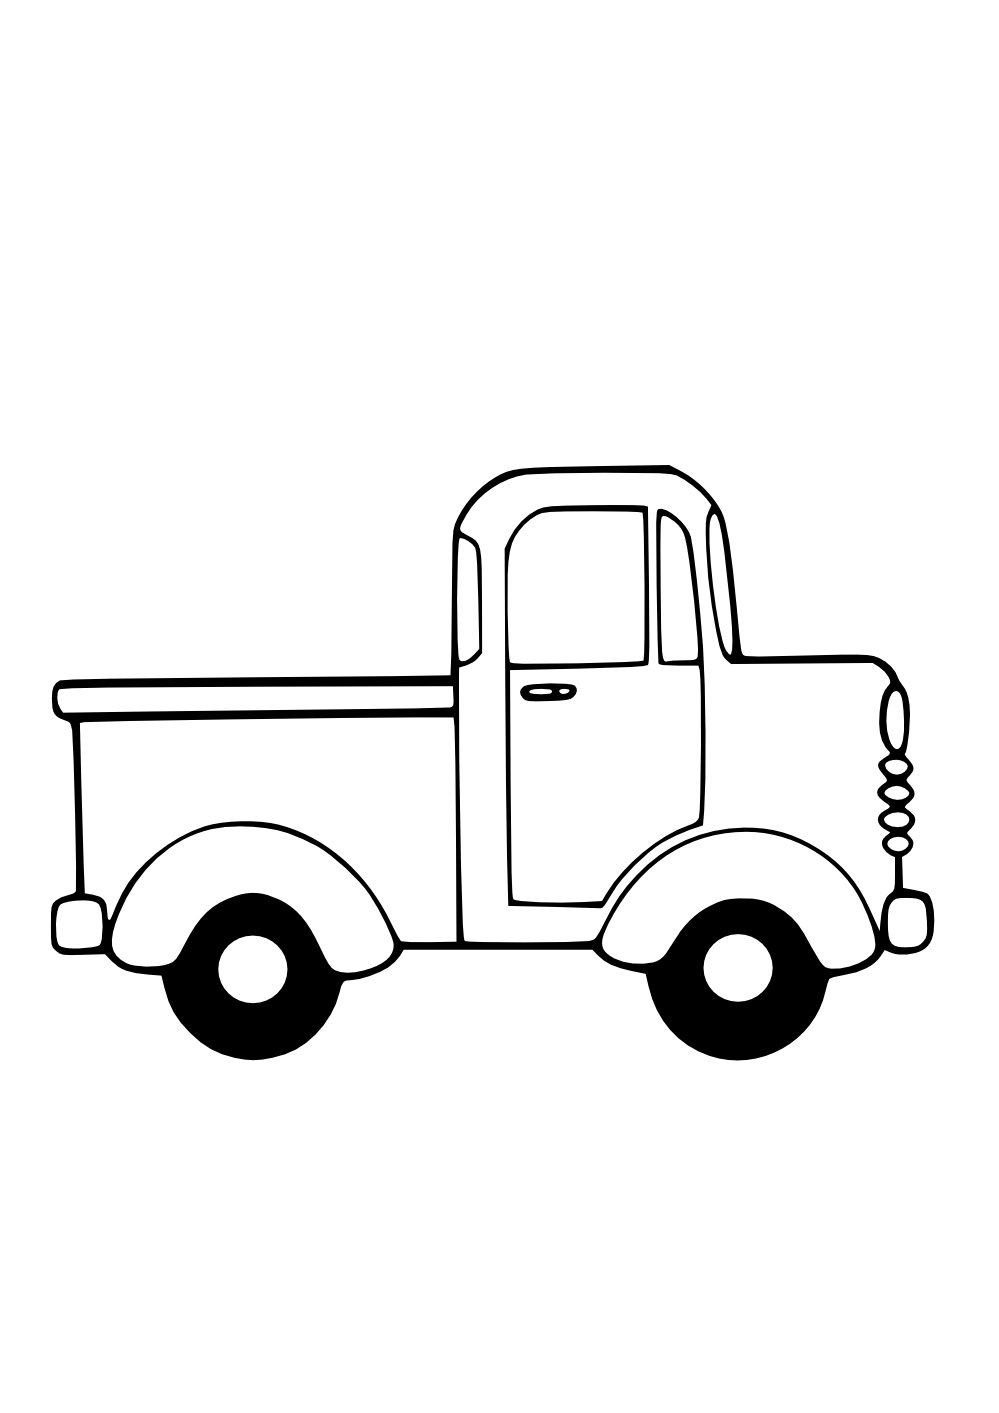 Truck black and white. Firetruck clipart toy